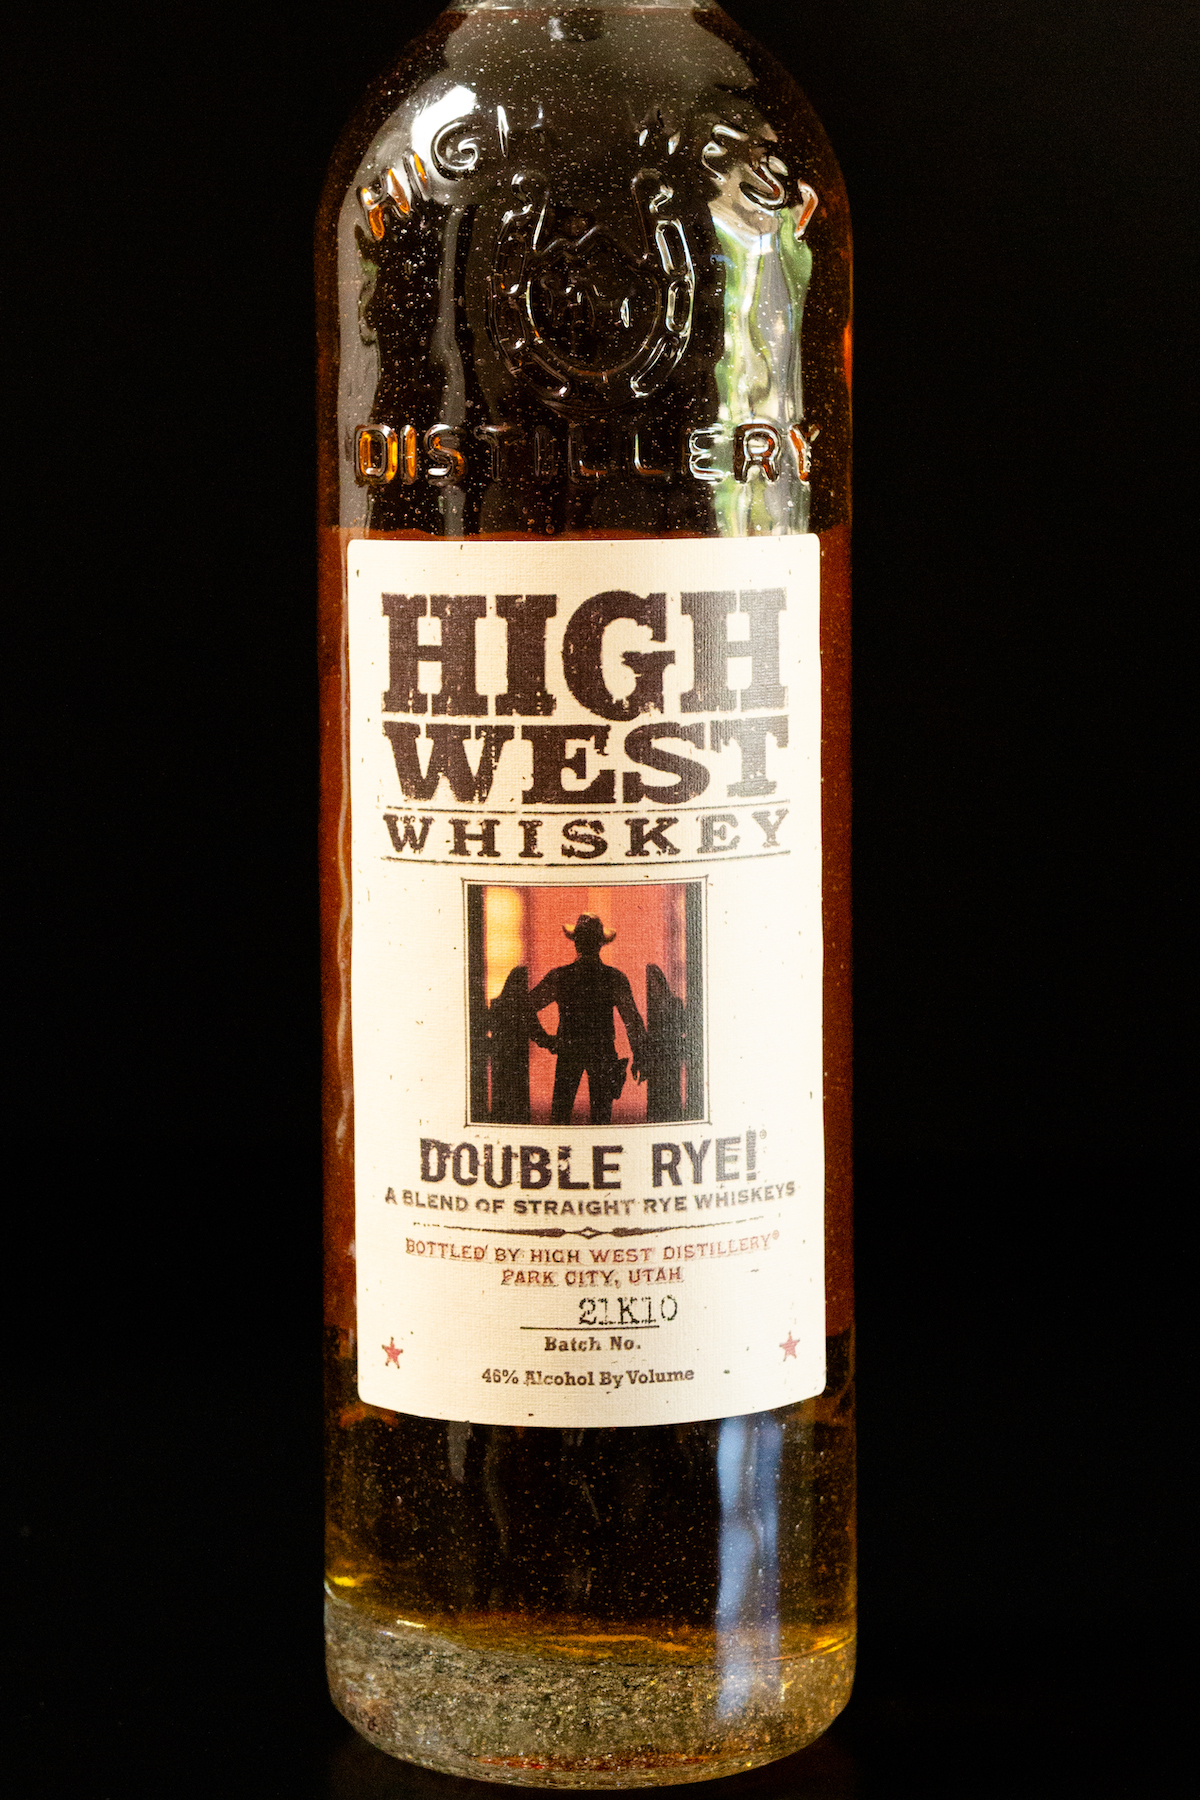 A bottle of High West Double Rye Whiskey on a black background.